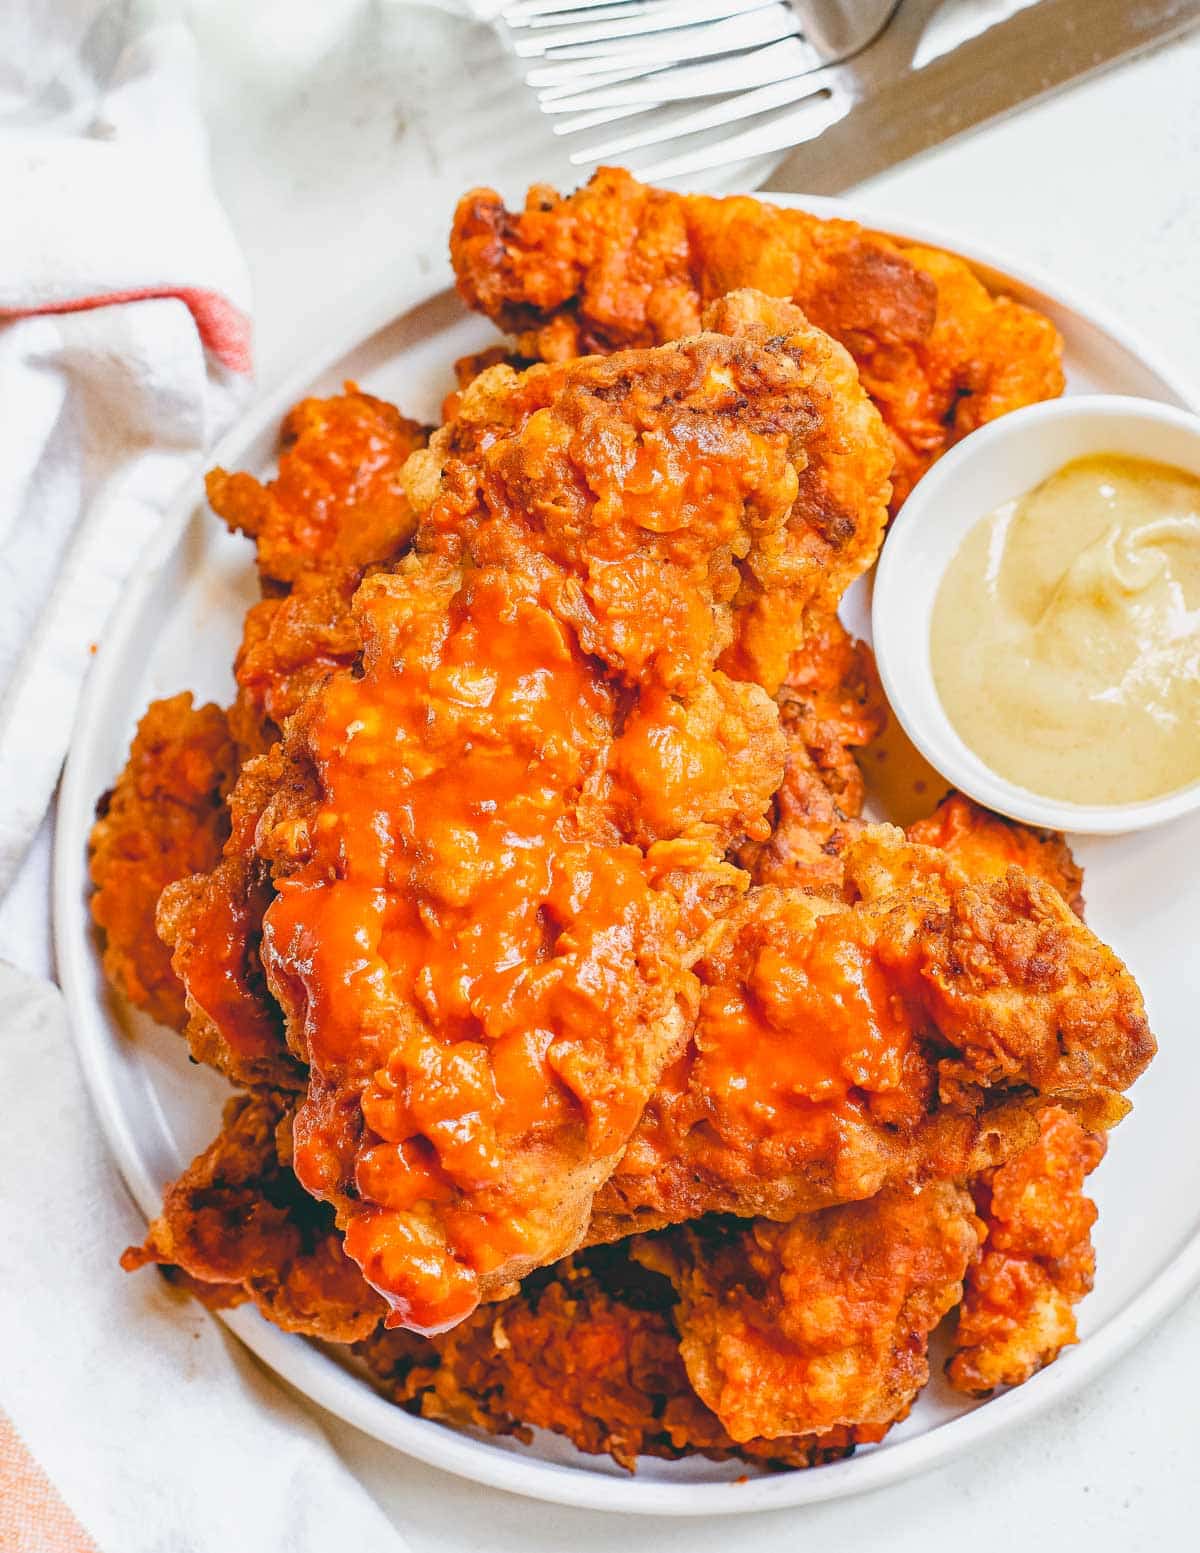 Fried chicken on a plate with sauce and a fork.